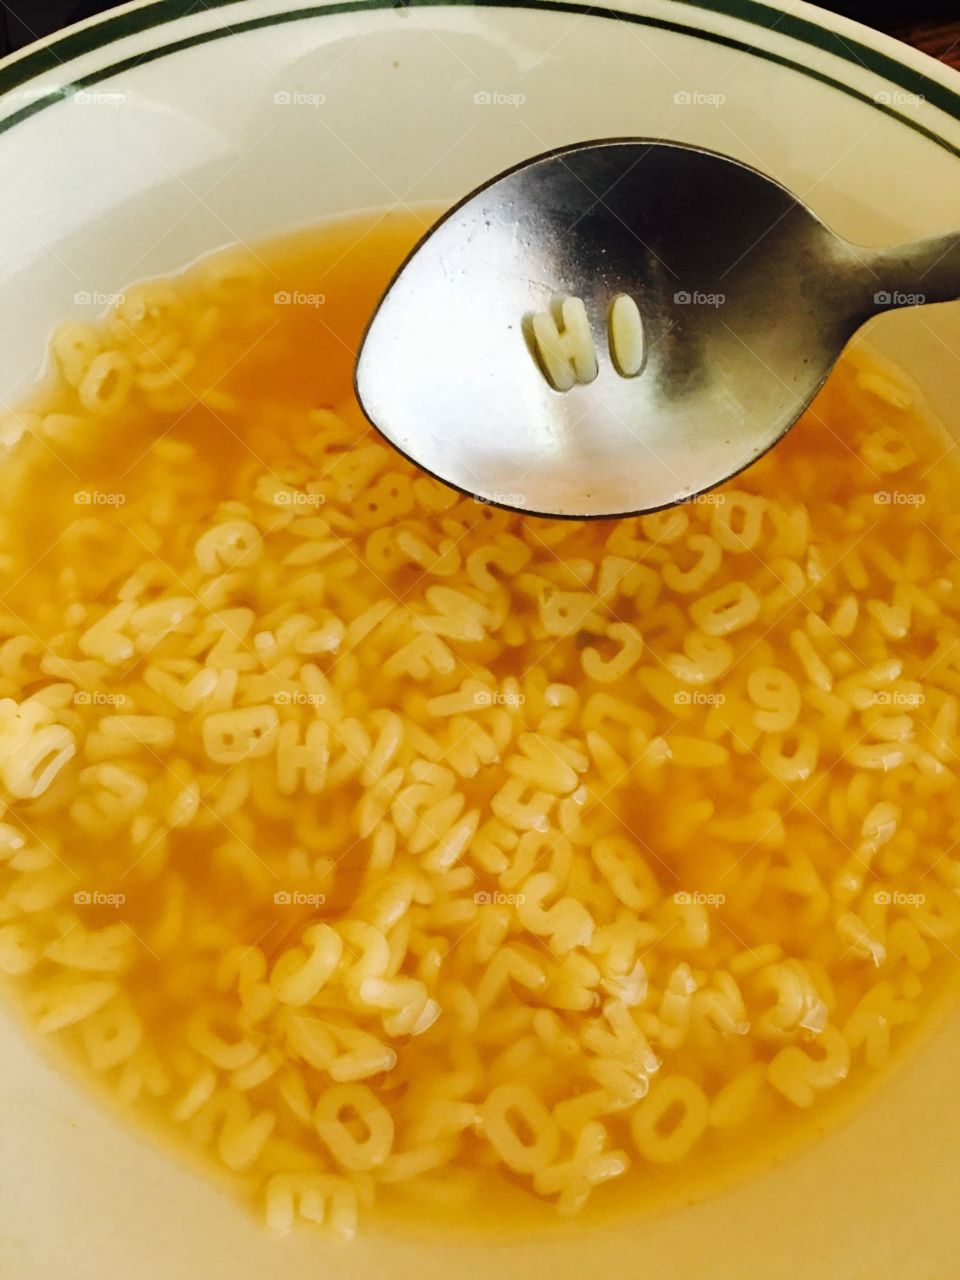 Nothing better then a Delicious Bowl of Warm ABC's Soup! c: